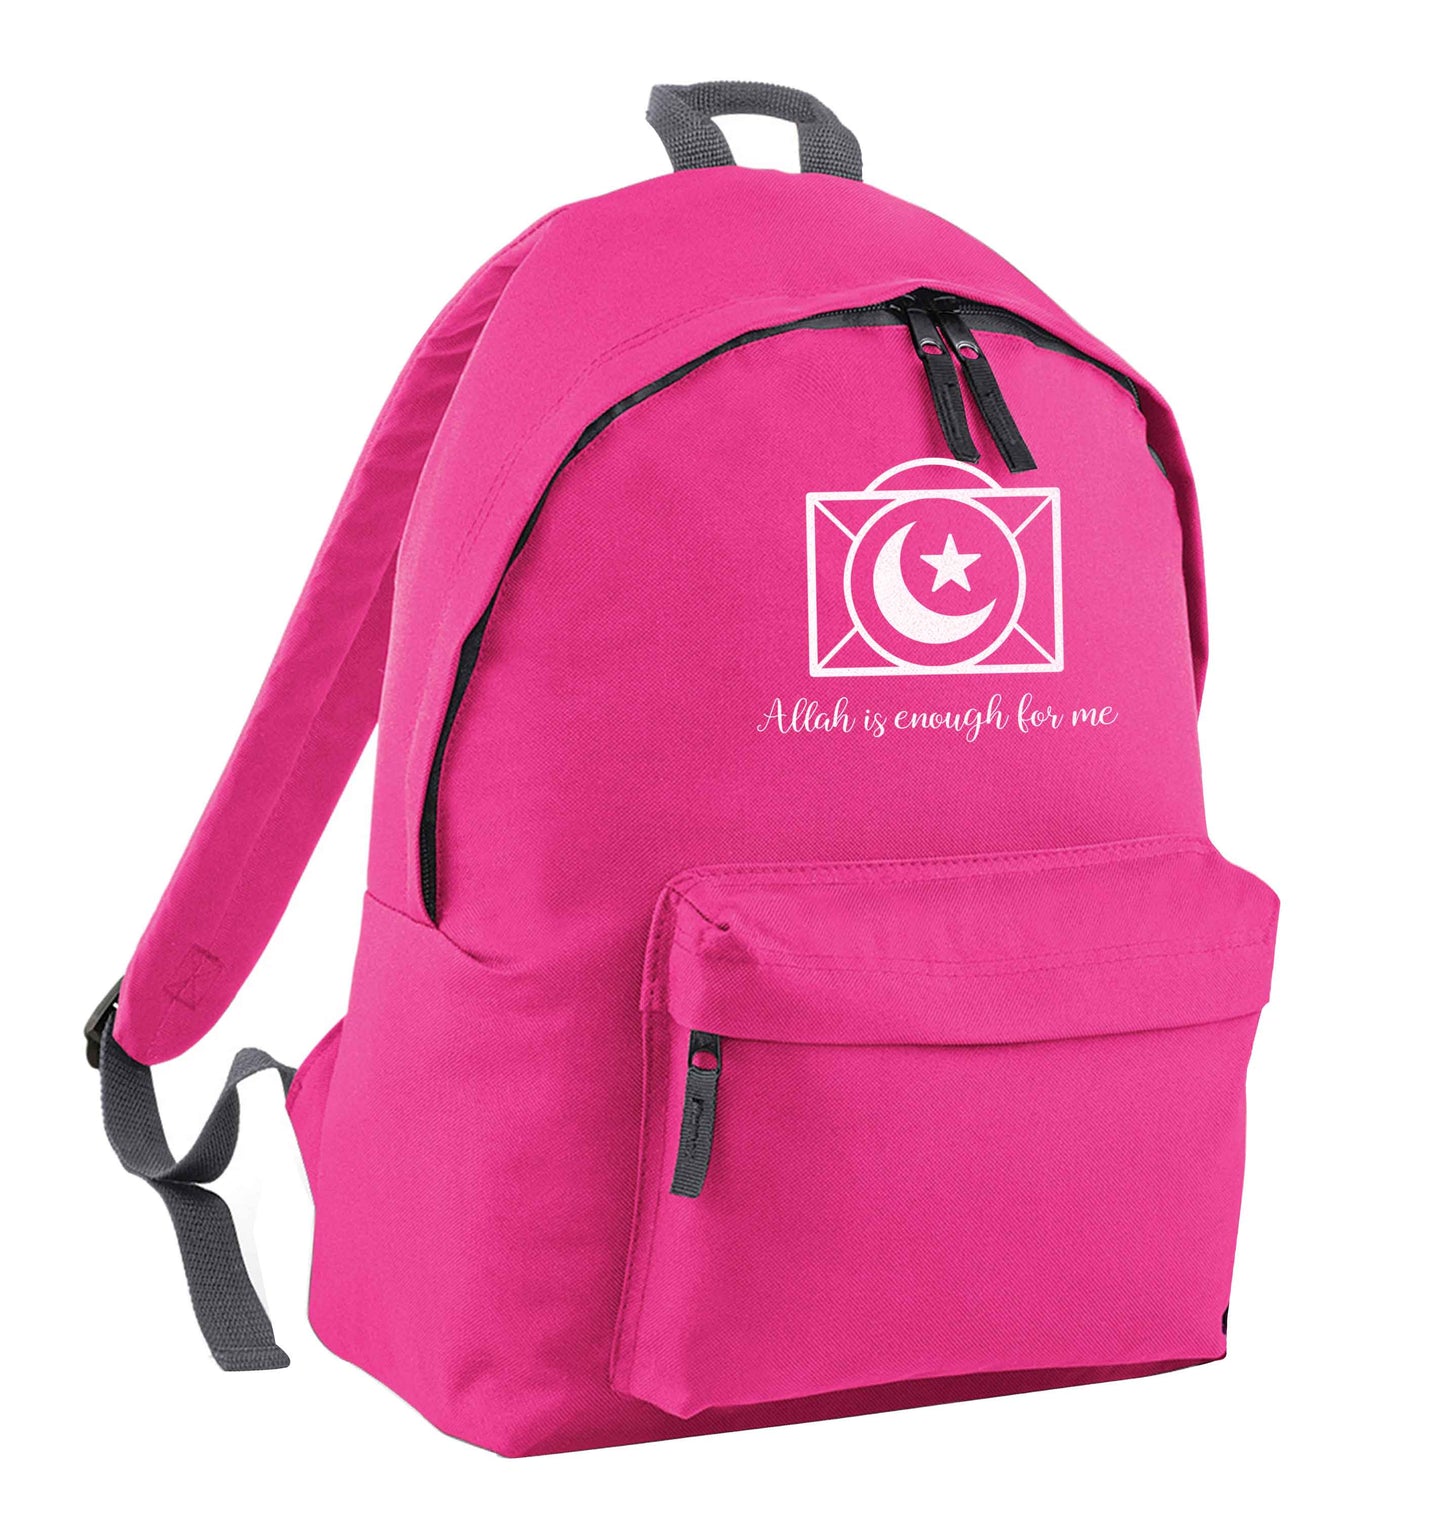 Allah is enough for me pink adults backpack